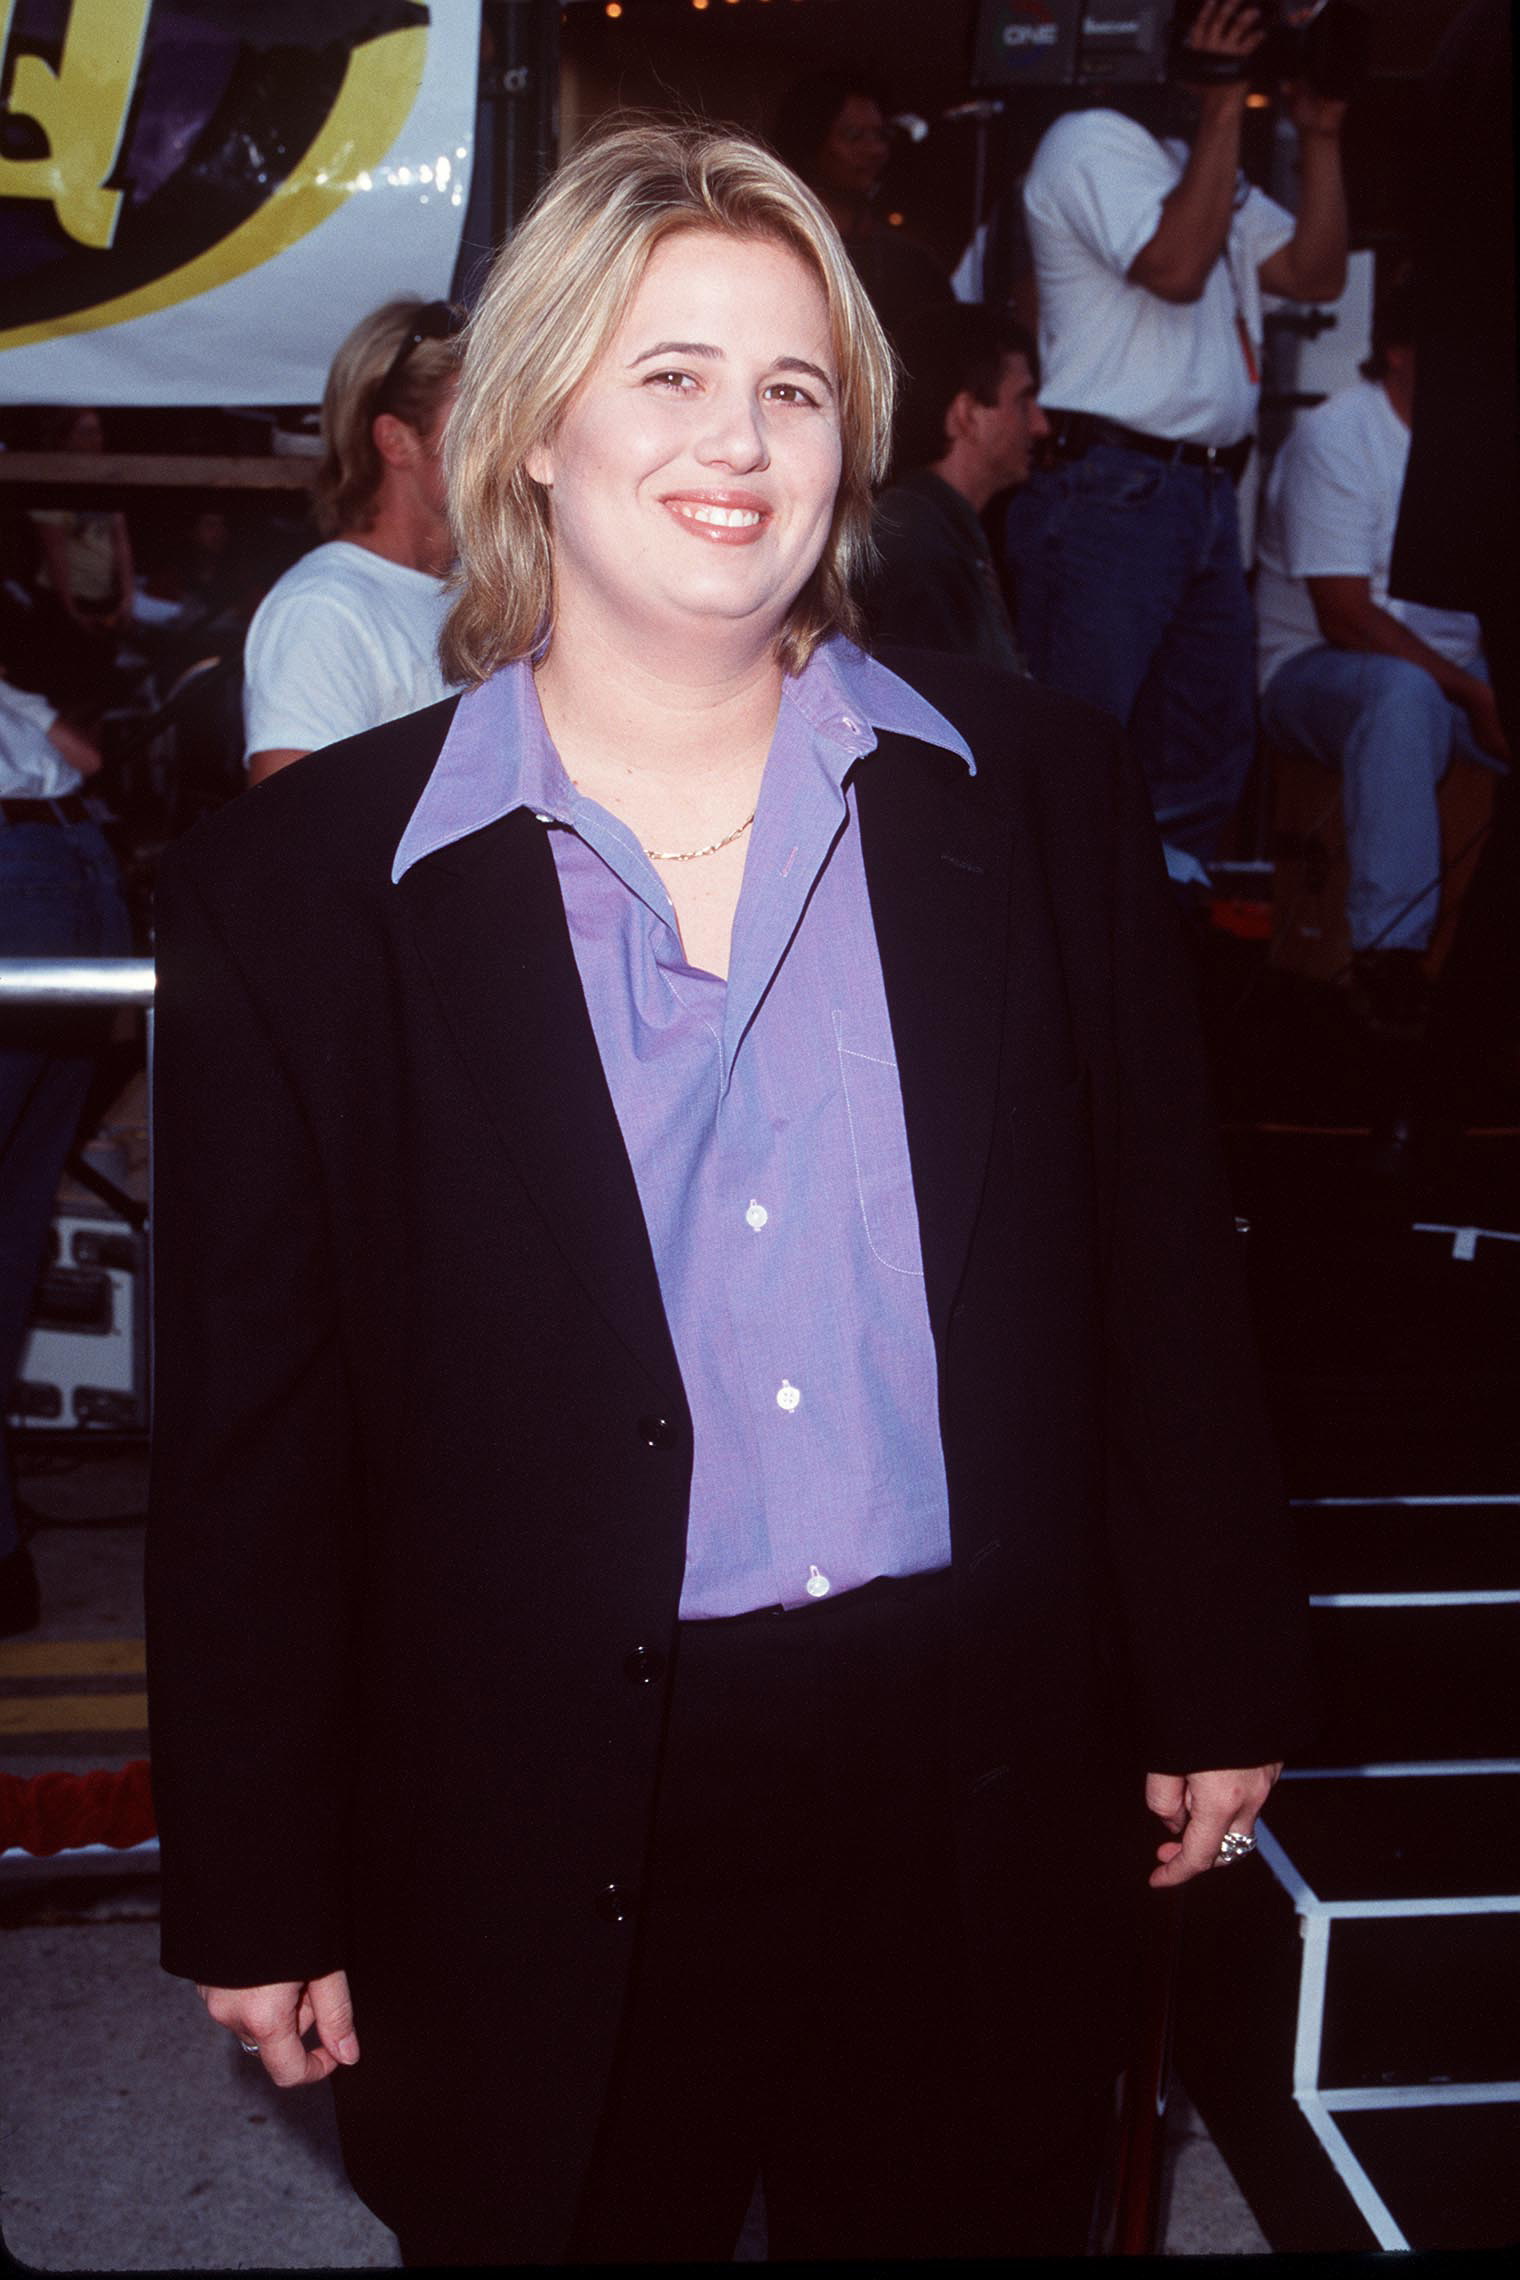 Chastity Bono attends "The X-files" Los Angeles premiere | Source: Getty Images